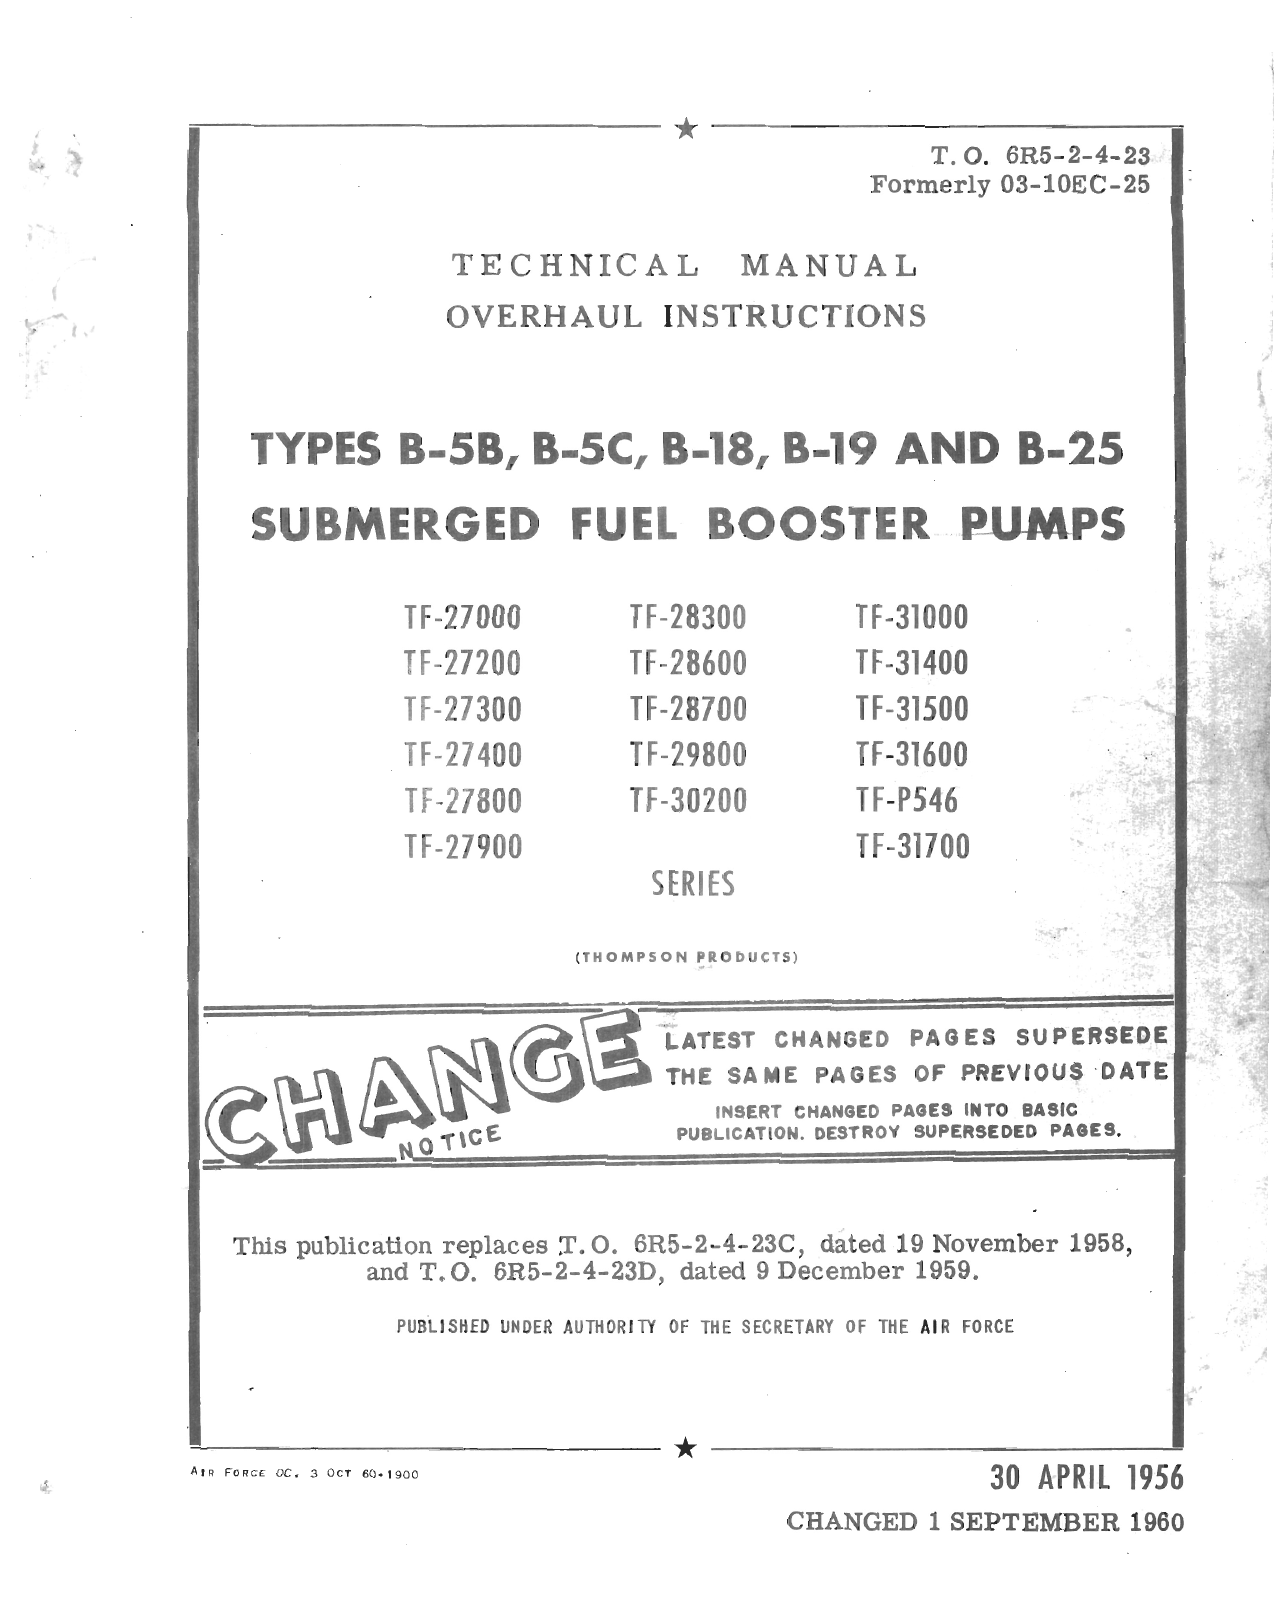 Sample page 1 from AirCorps Library document: Overhaul Instructions for Submerged Fuel Booster Pumps - Types B-5B, B-5C, B-18, B-19 and B-25 